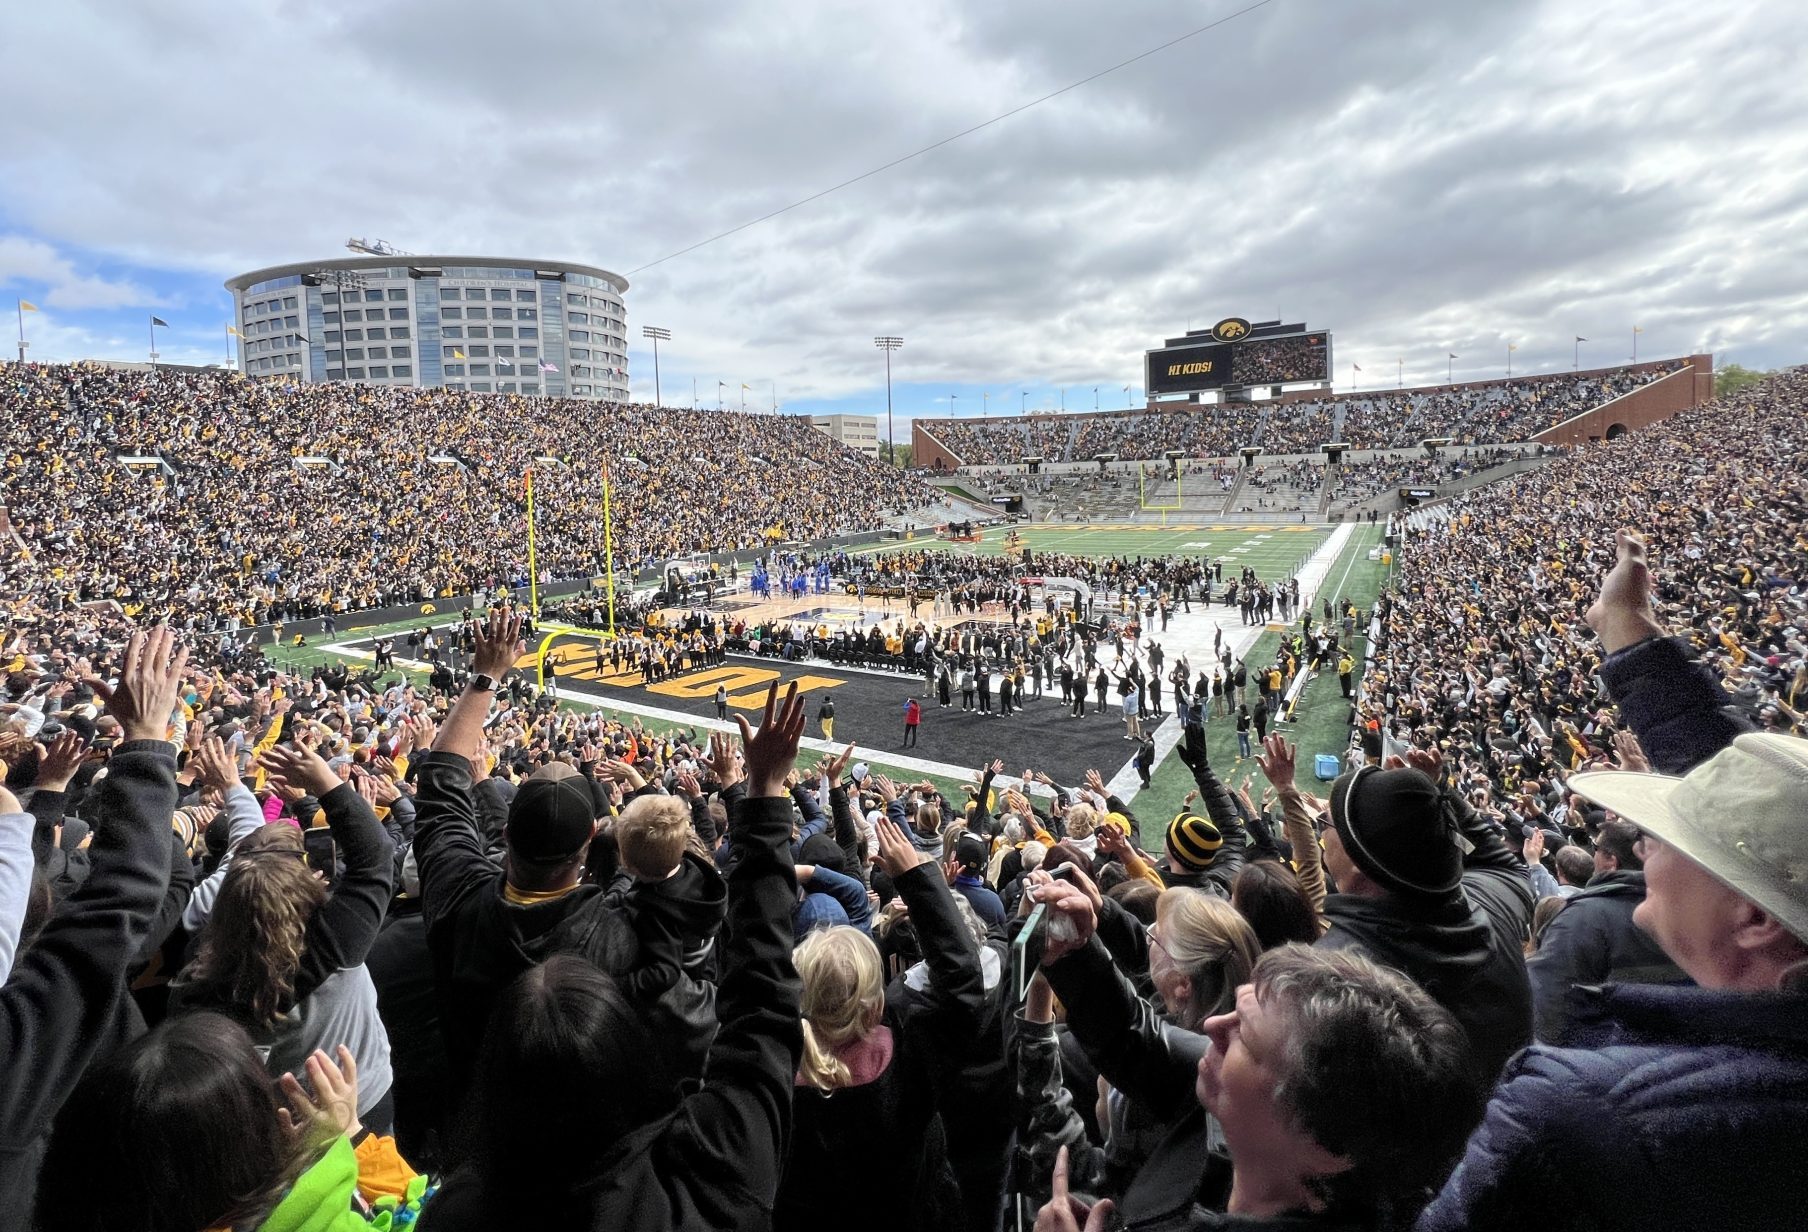 Fans gather for the DePaul-Iowa women’s charity basketball game at Kinnick Stadium in Iowa City, Iowa, on Sunday, Oct. 15, 2023. The outdoor game broke the record for attendance for a woman’s basketball game with 55,646 fans in attendance.